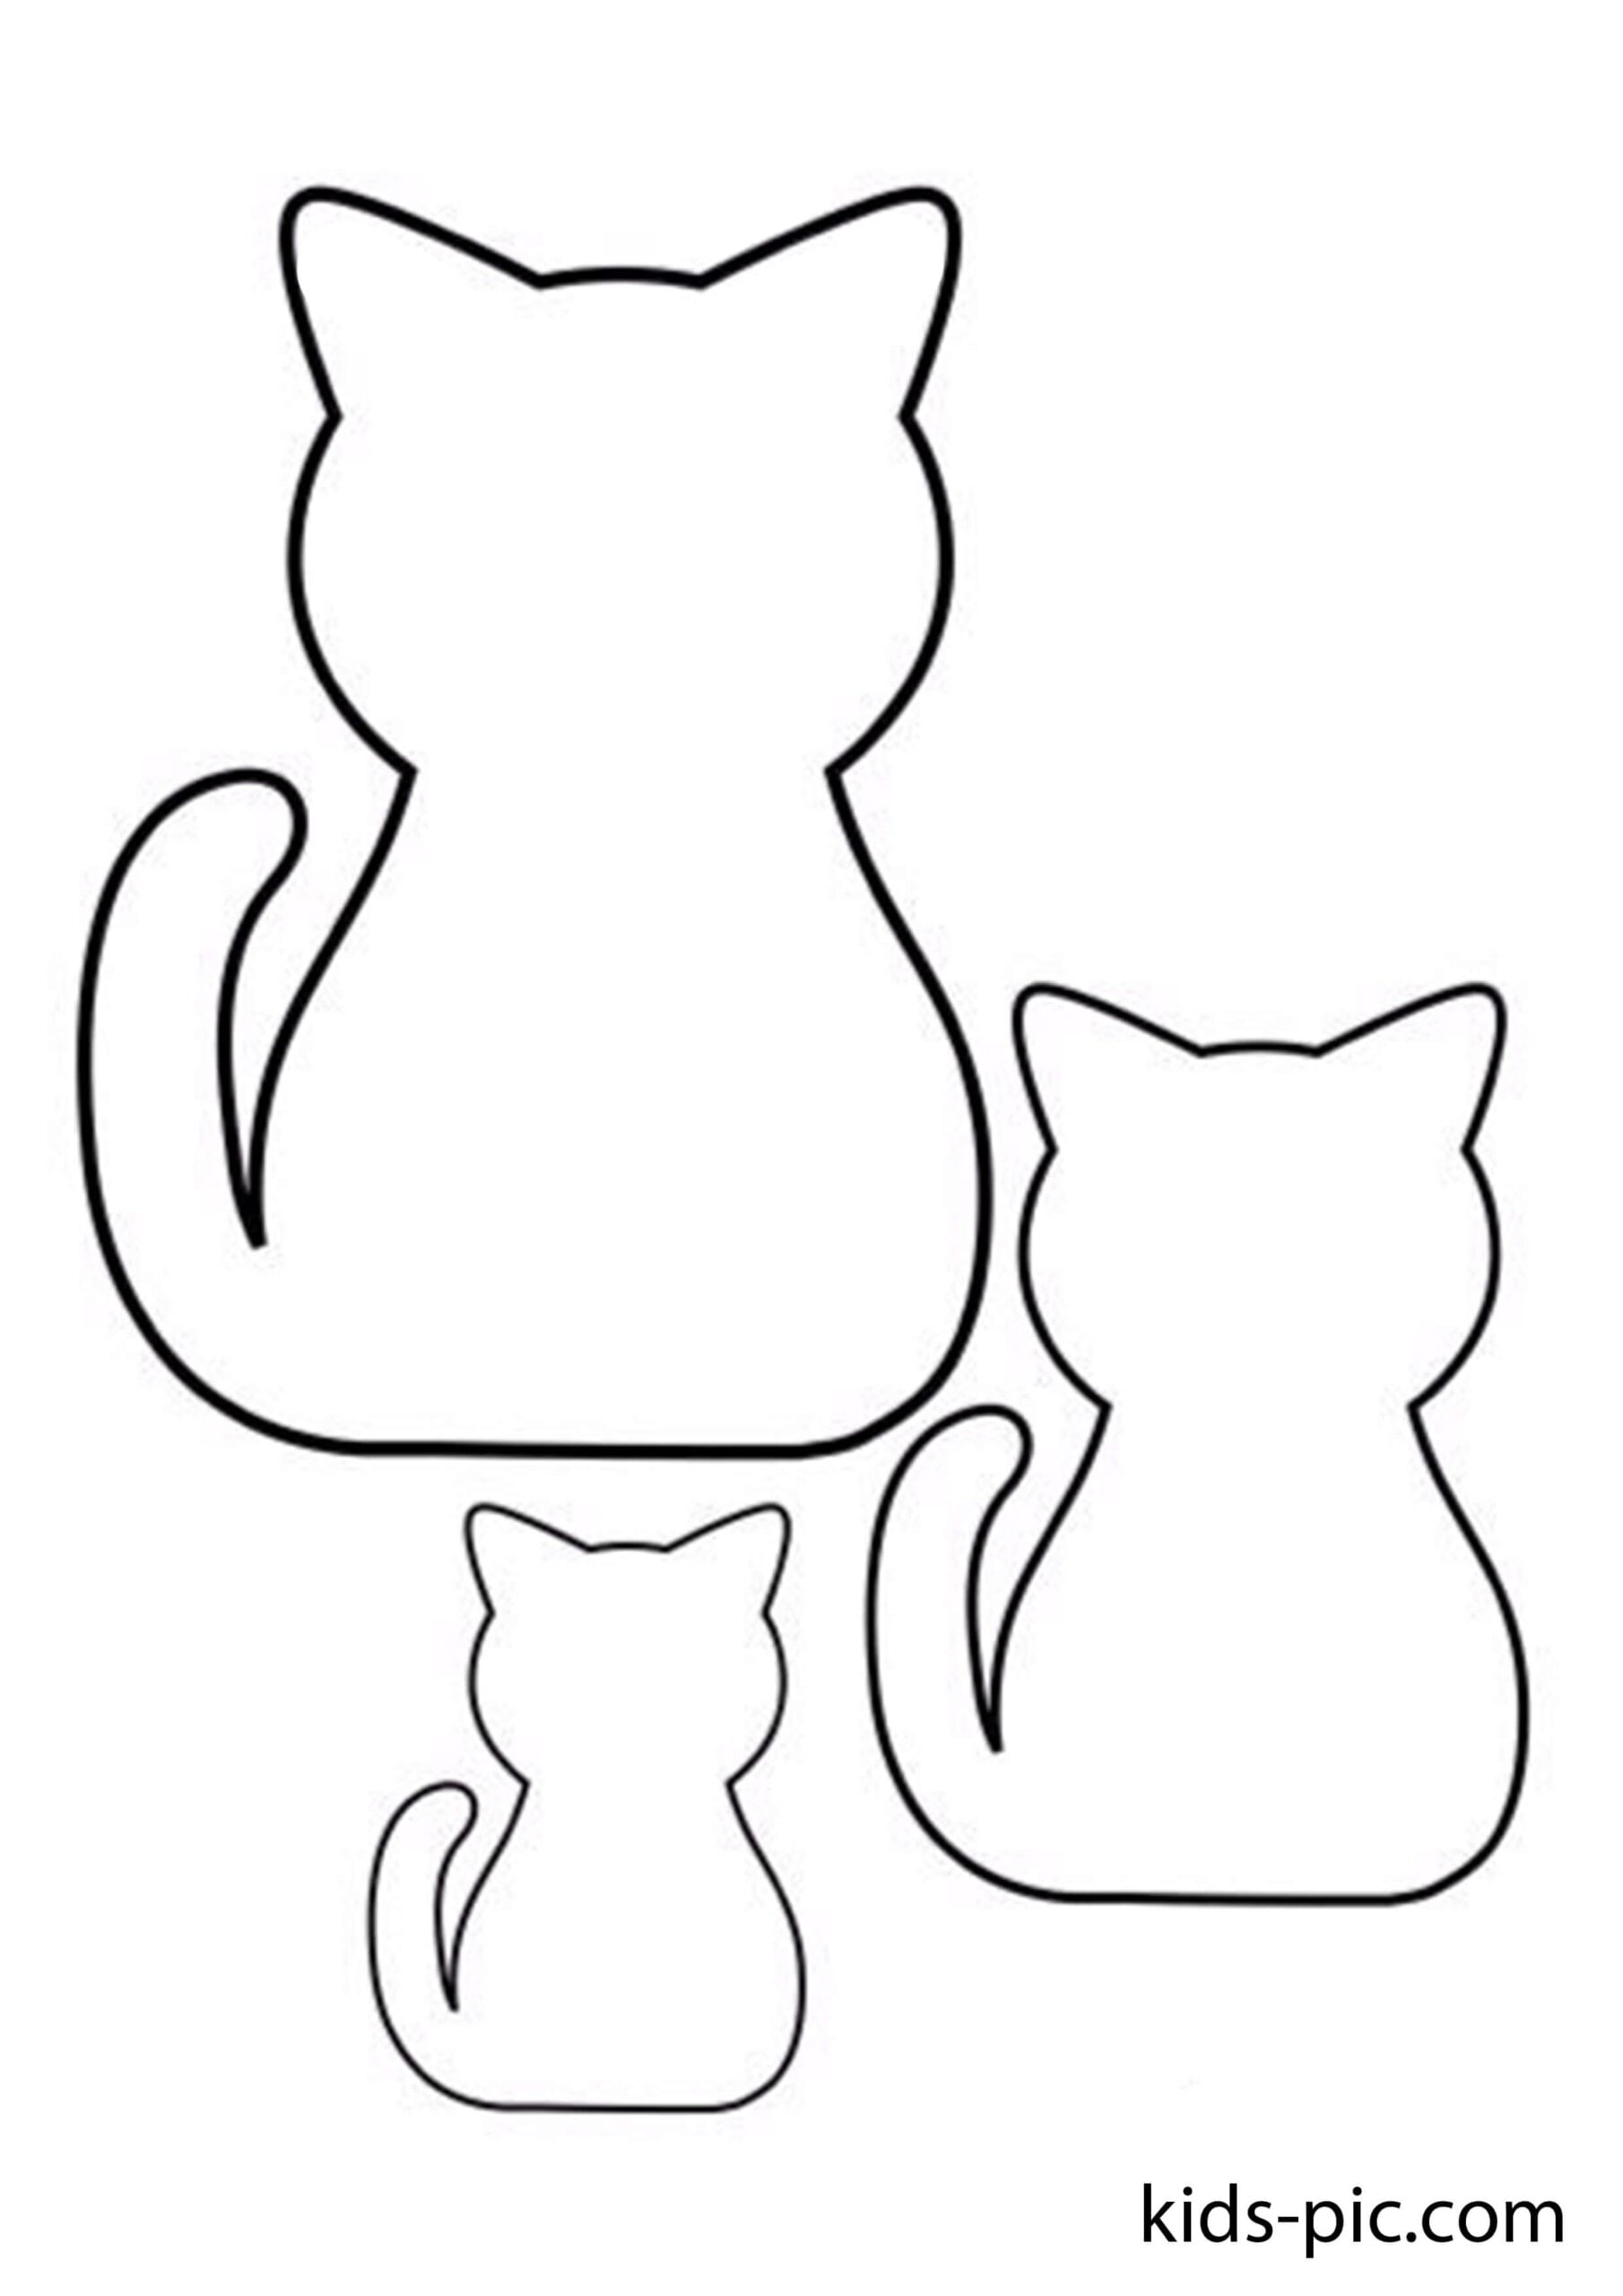 Cat Templates To Cut Out Kids Pic